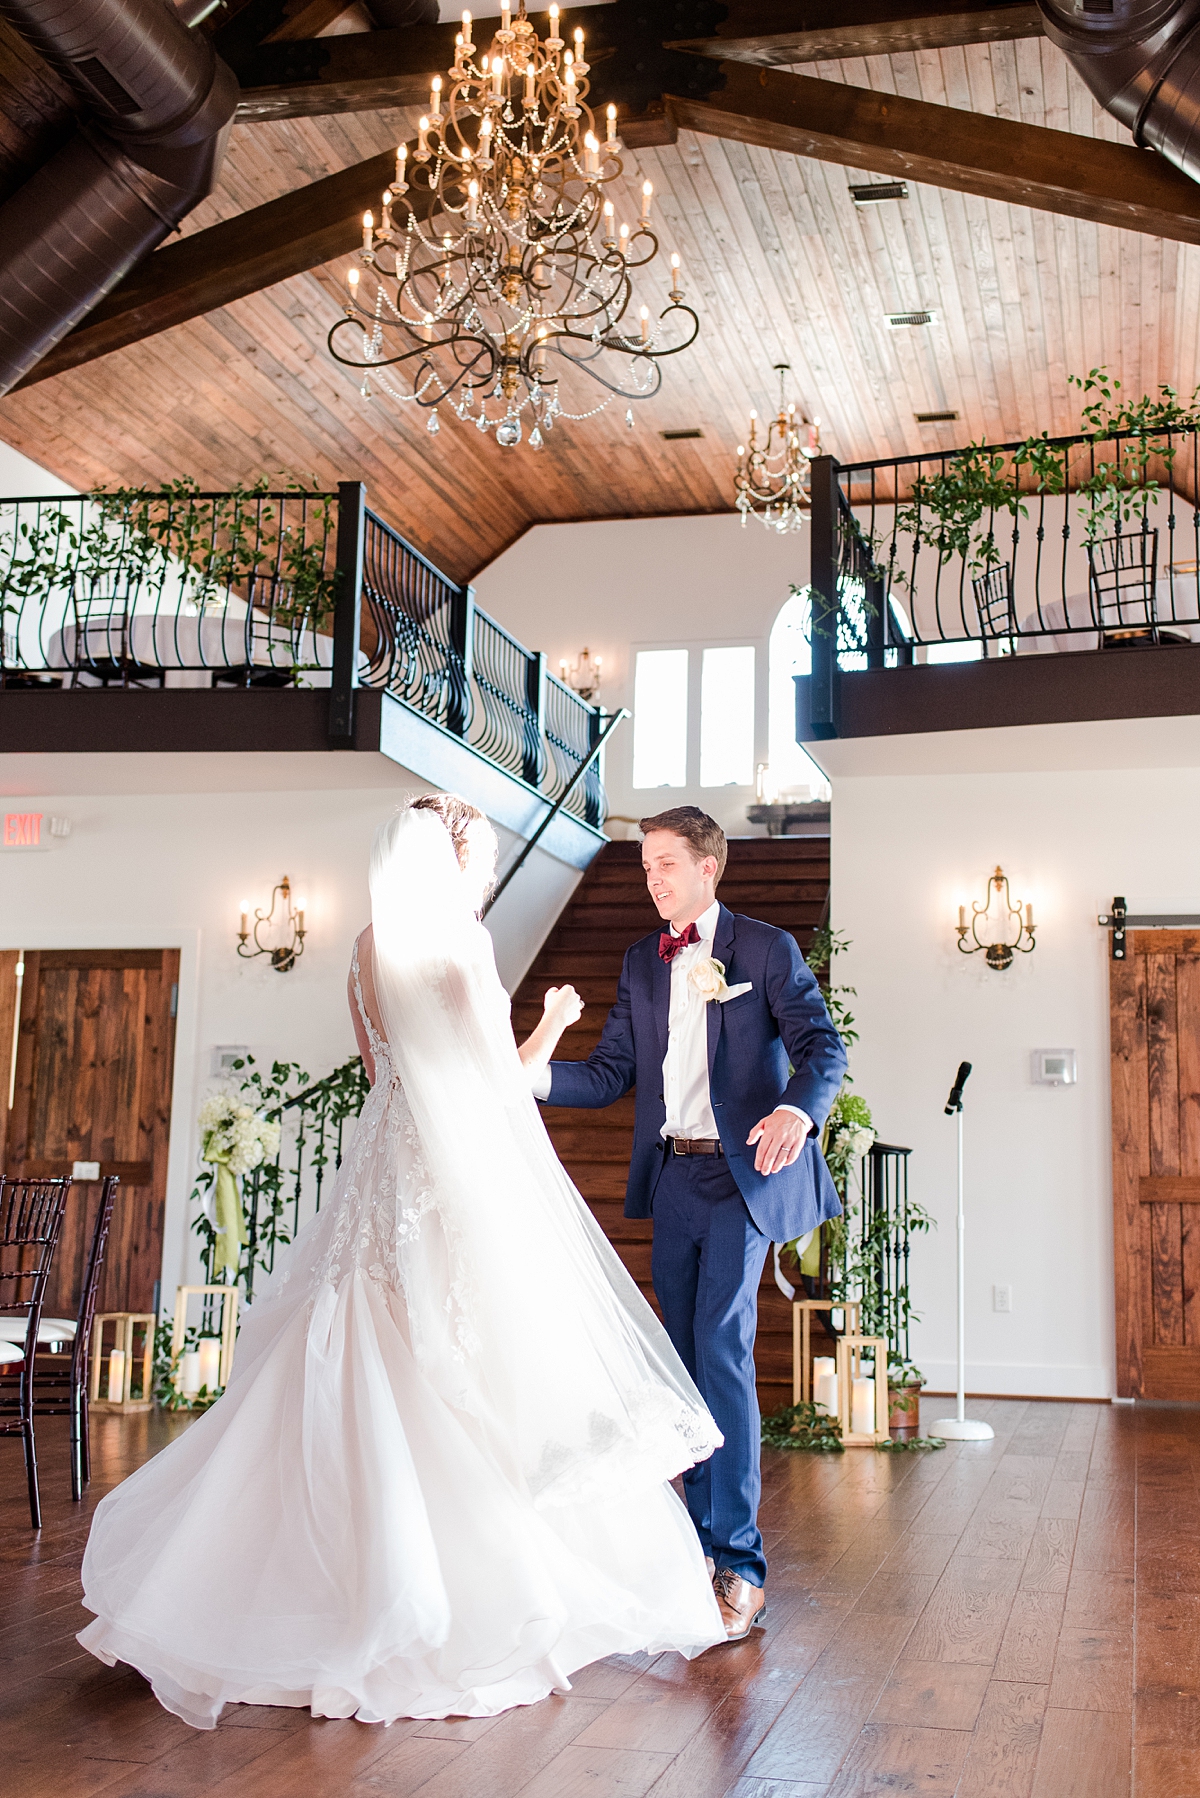 Groom Twirling Bride During First Dance at Burlington Fall Wedding Reception. Wedding Photography by Virginia Wedding Photographer Kailey Brianne Photography. 